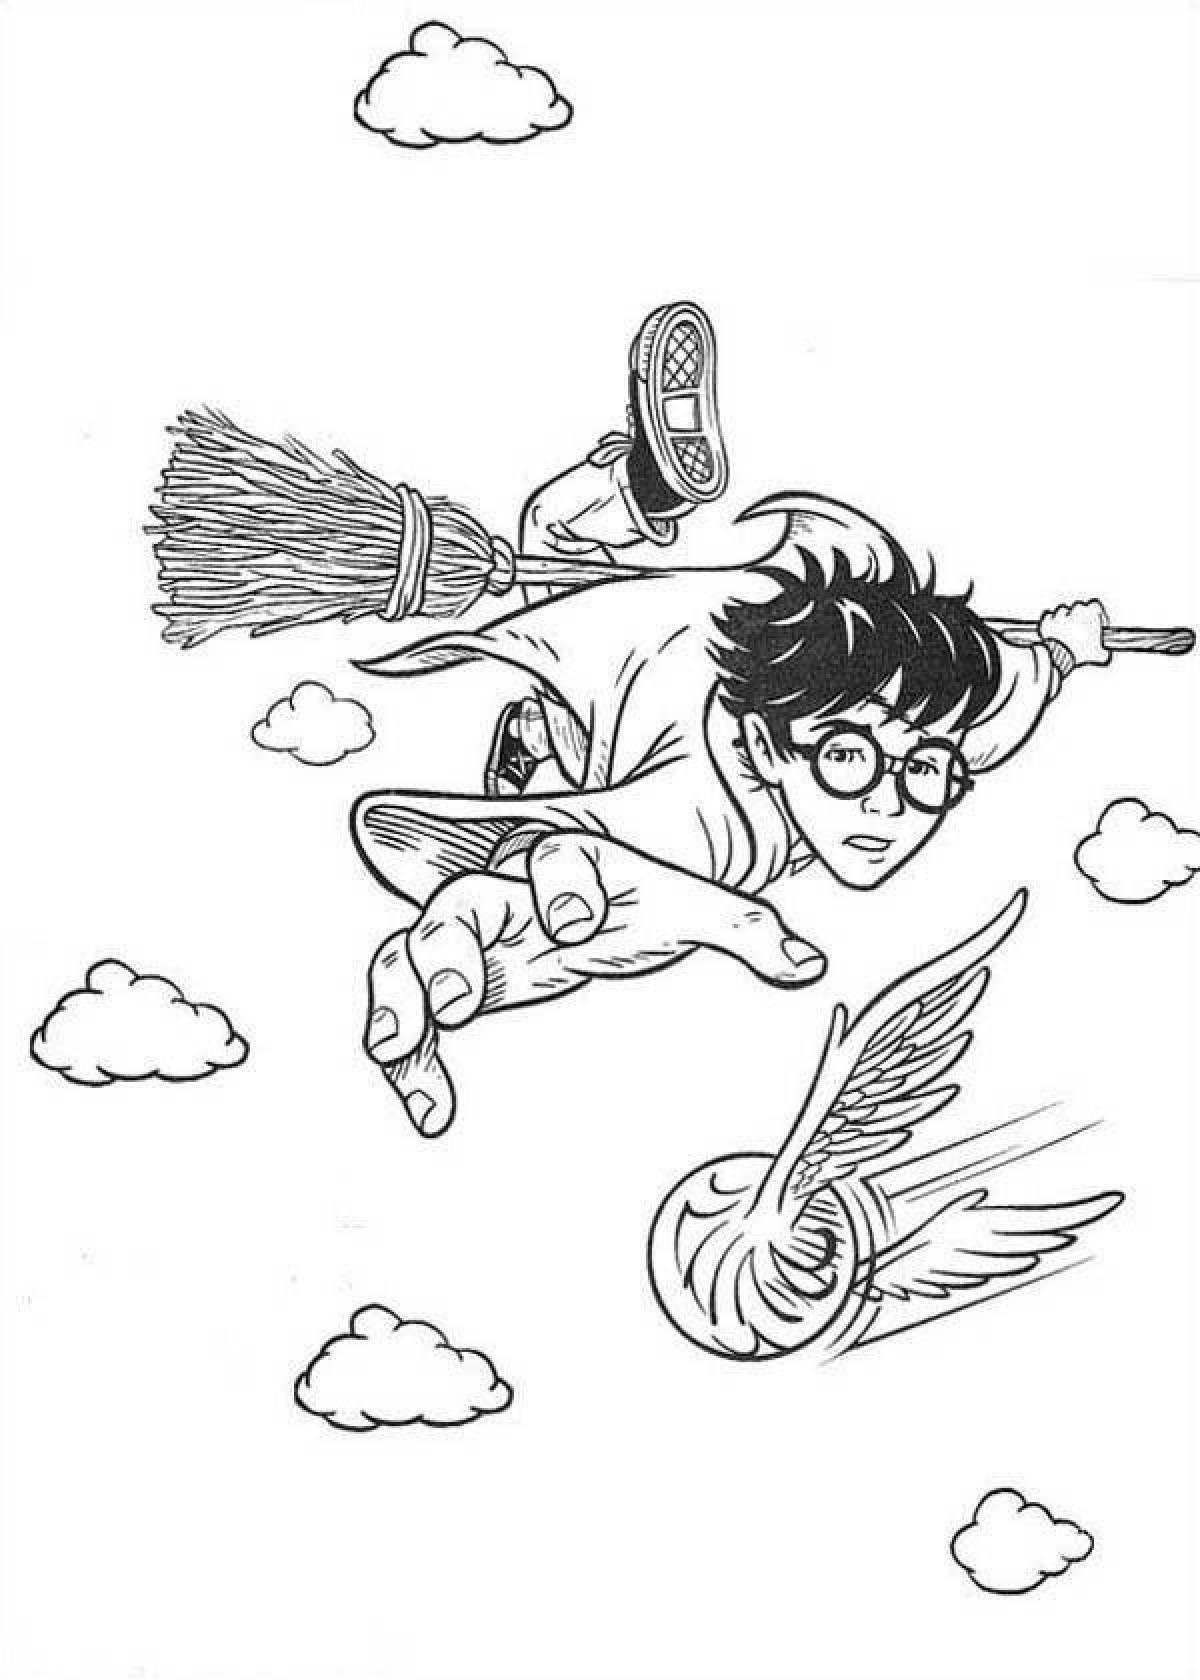 Harry potter girls creative coloring book